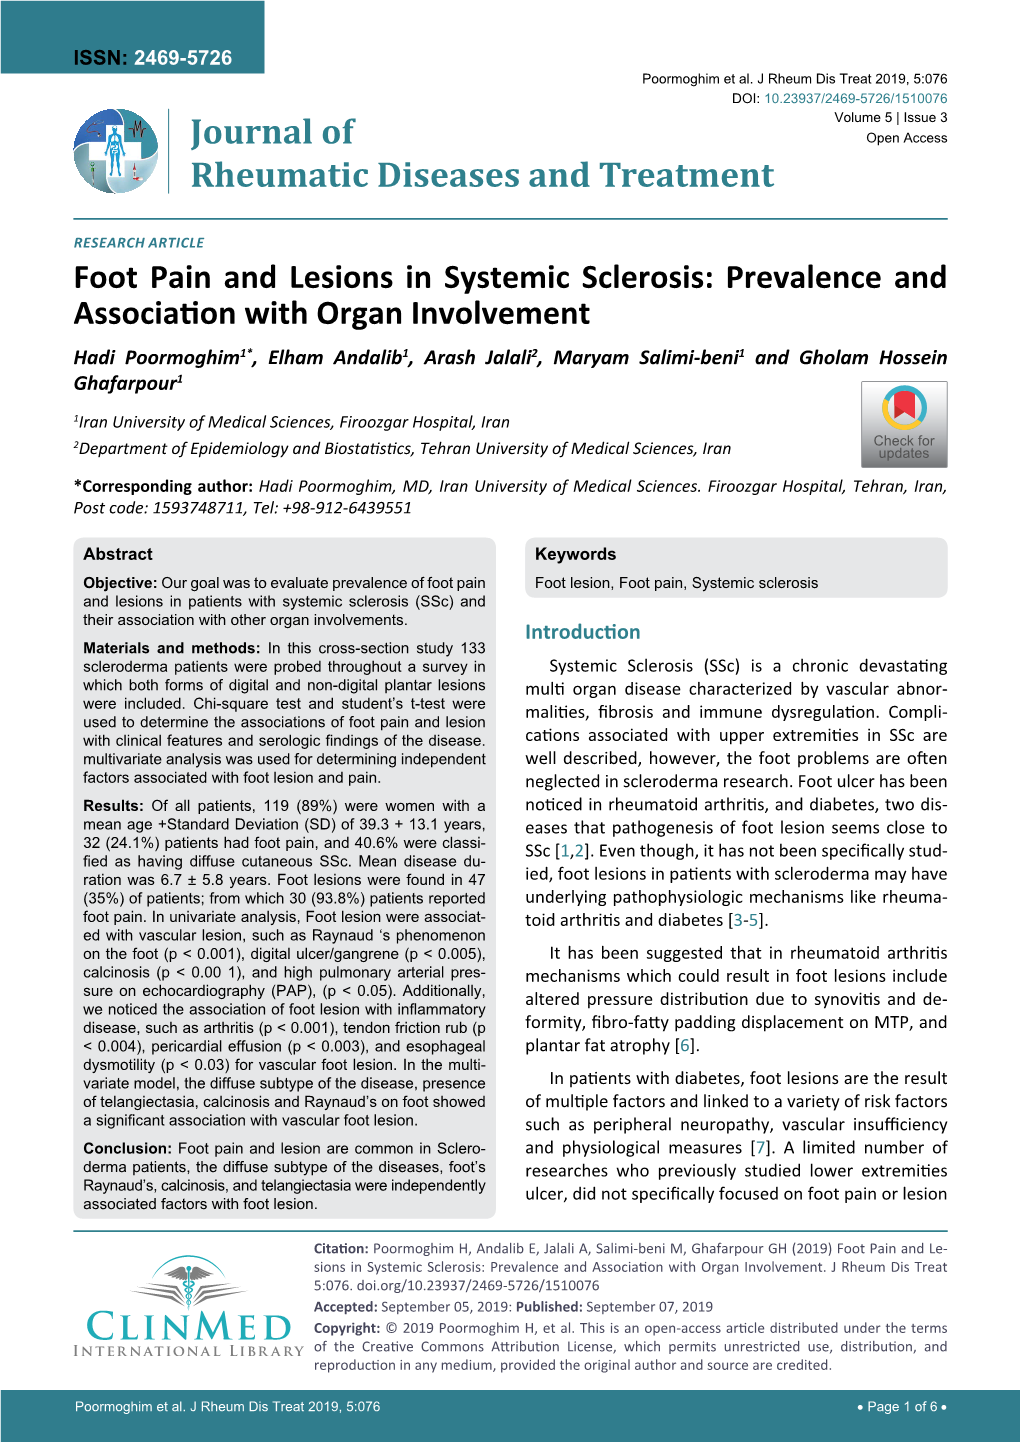 Foot Pain and Lesions in Systemic Sclerosis: Prevalence And